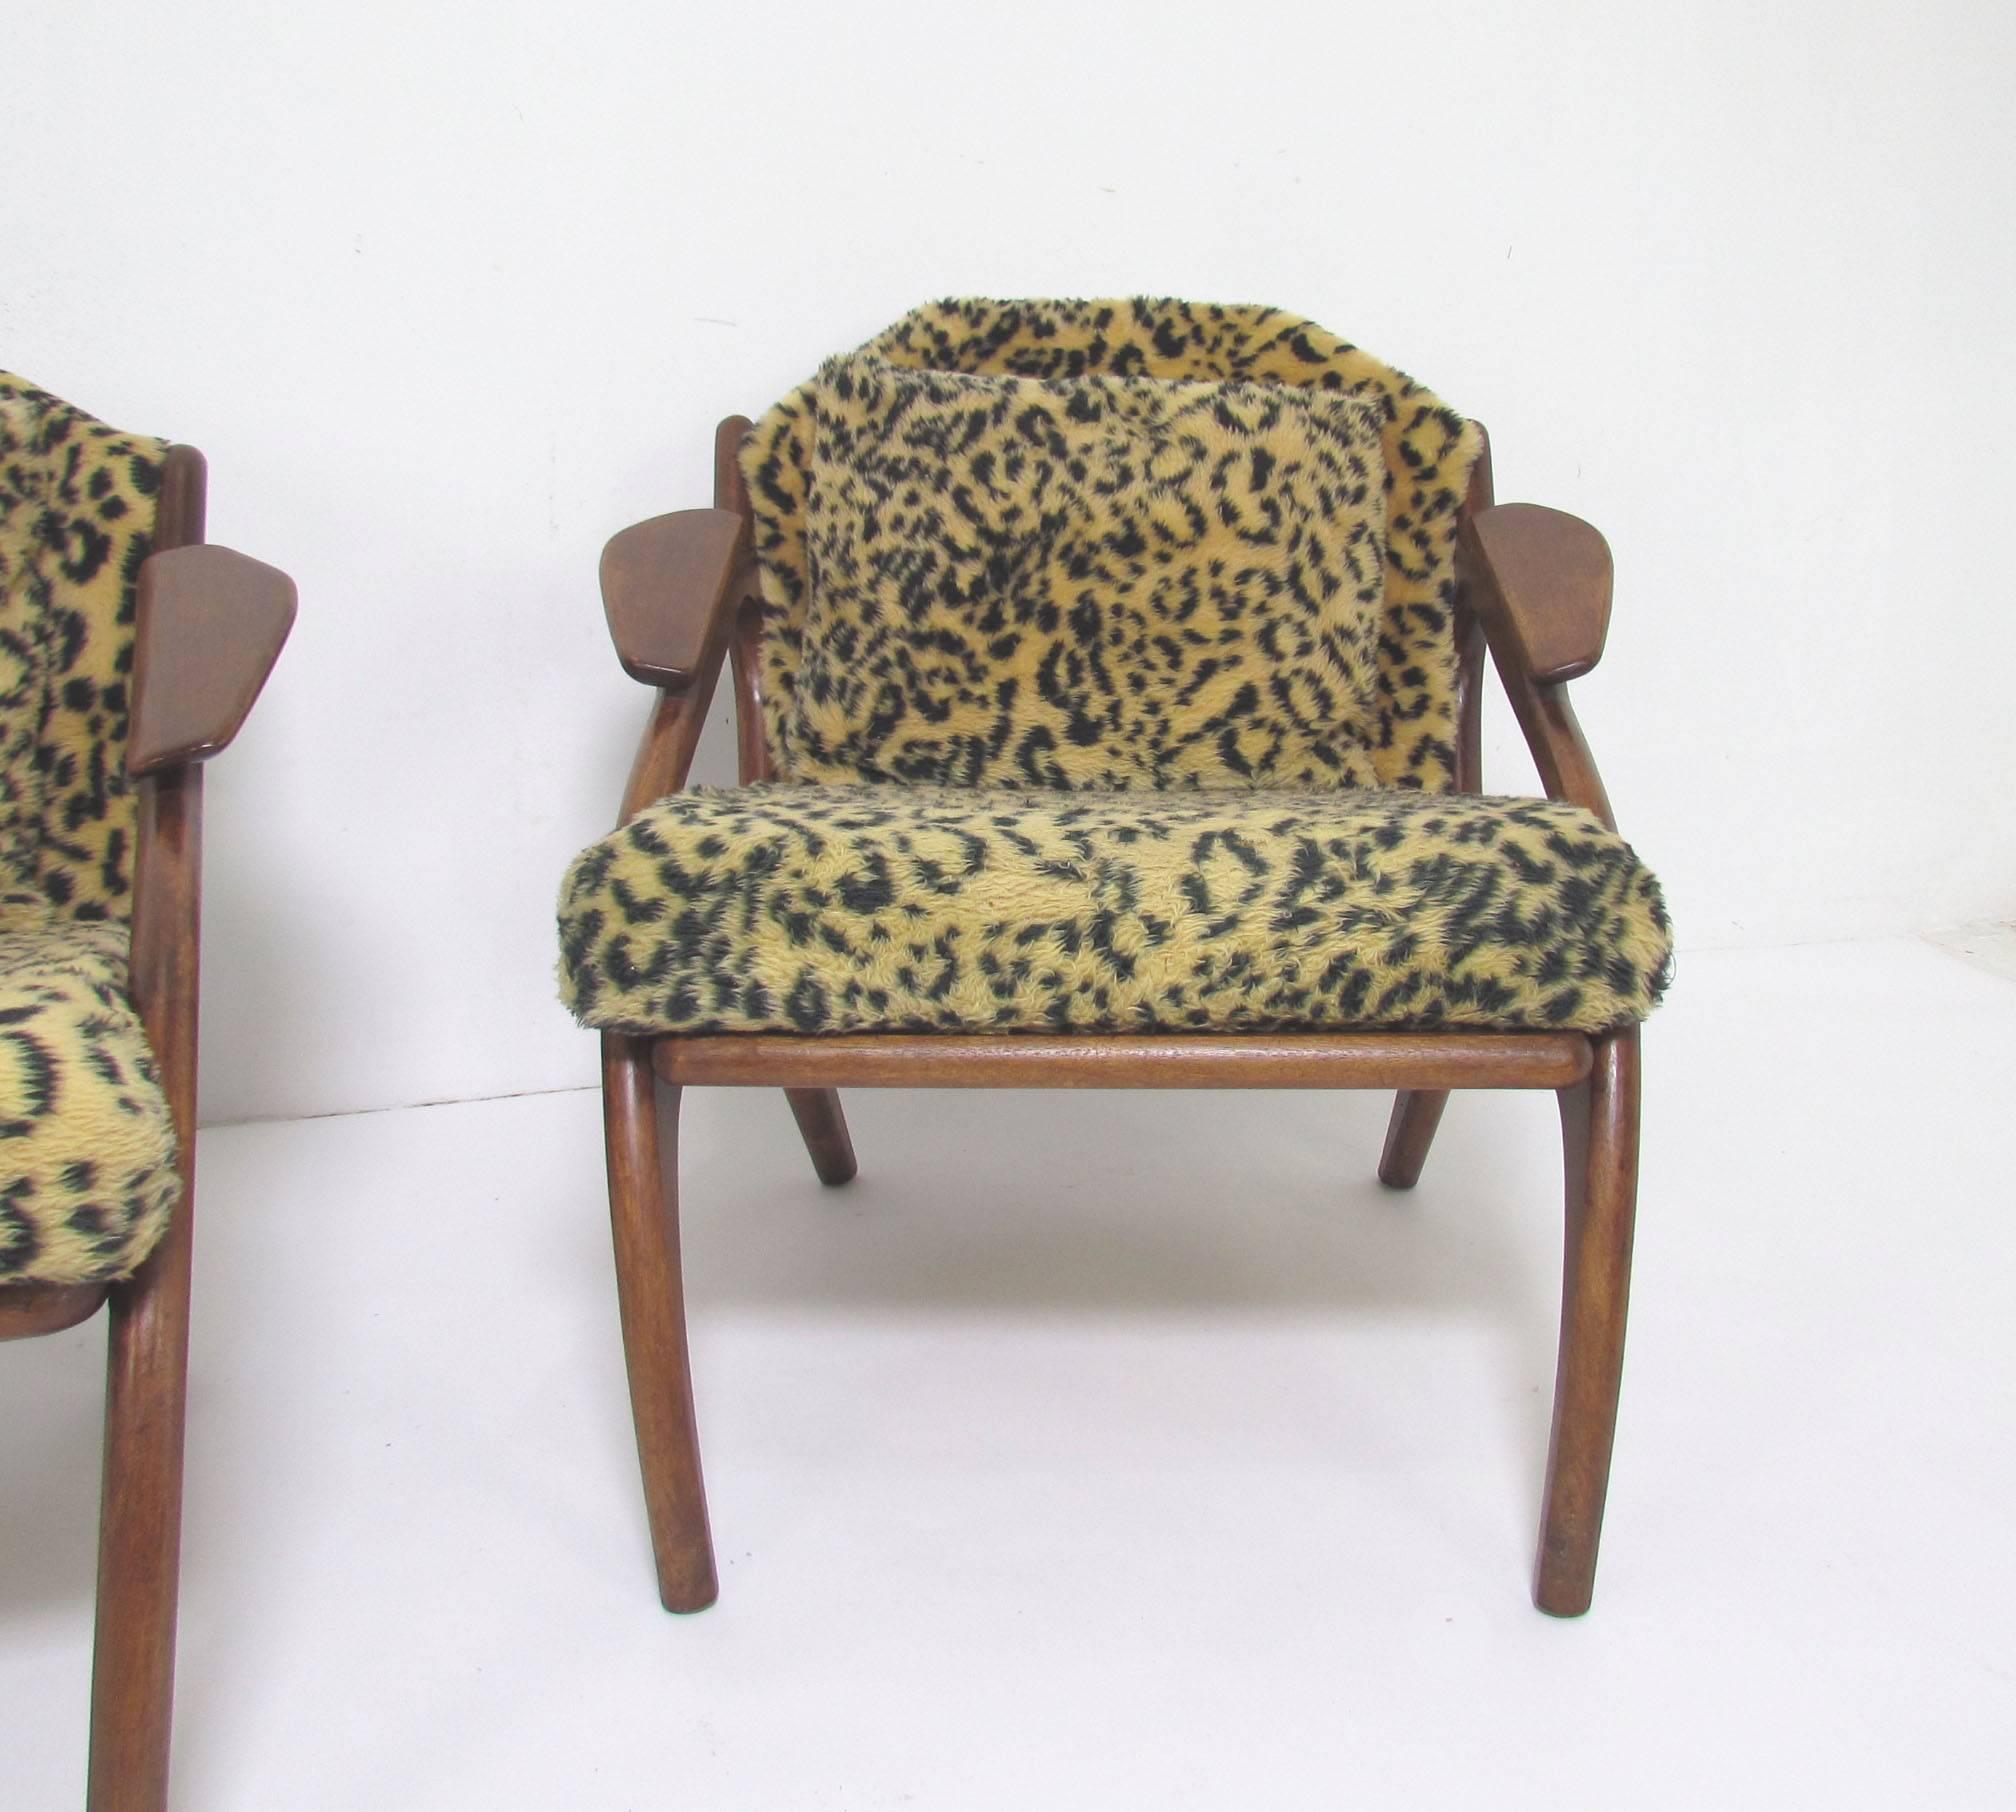 Upholstery Pair of Sculptural Lounge Chairs by Adrian Pearsall for Craft Associates